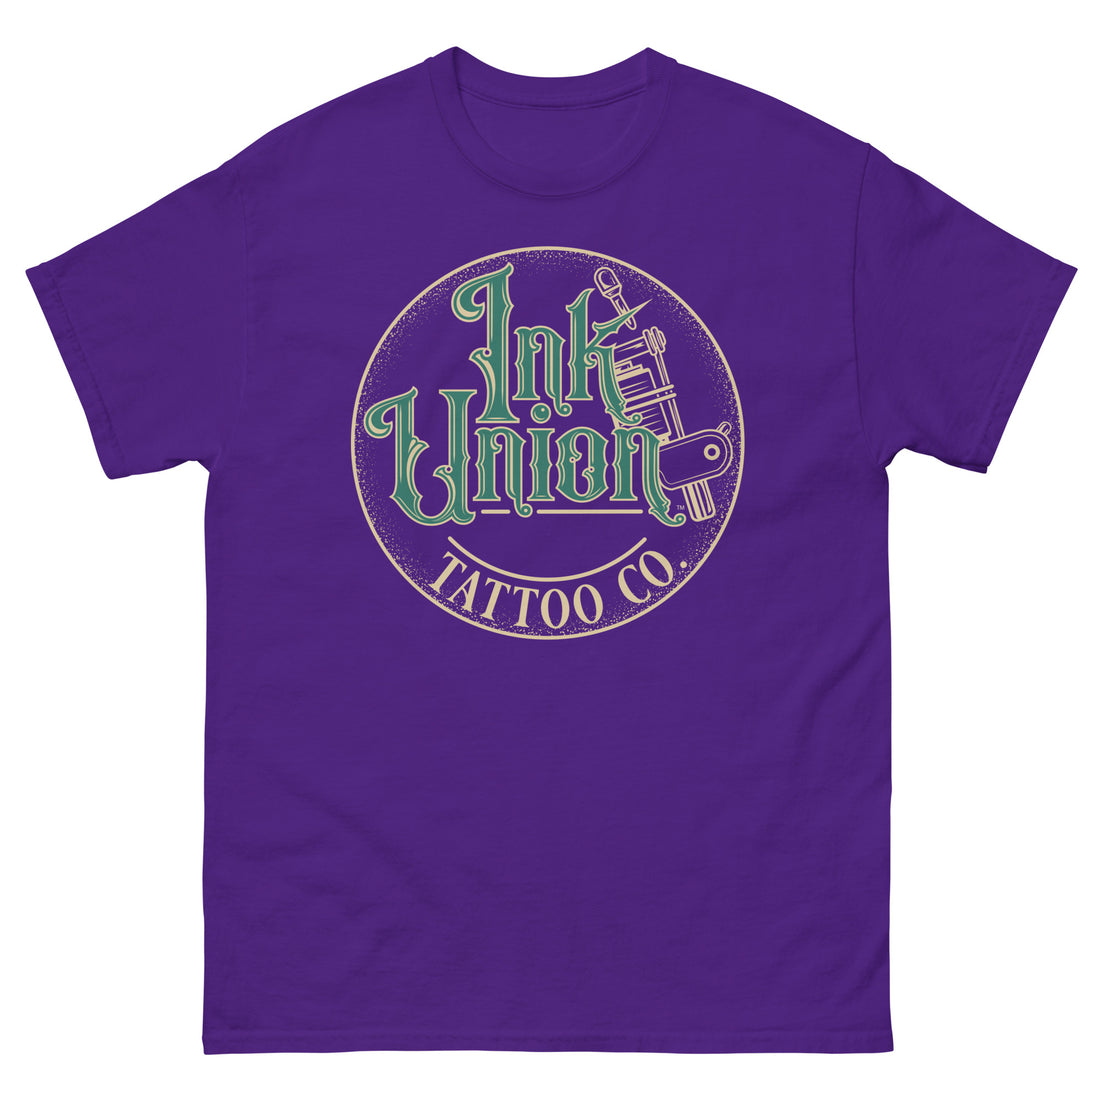 A purple t-shirt with a gold circle containing fancy lettering in green and gold that says Ink Union and a gold tattoo machine peeking out from behind on the right side.  There is a dot work gradient inside the circle, and the words Tattoo Co. in gold are at the bottom of the design.